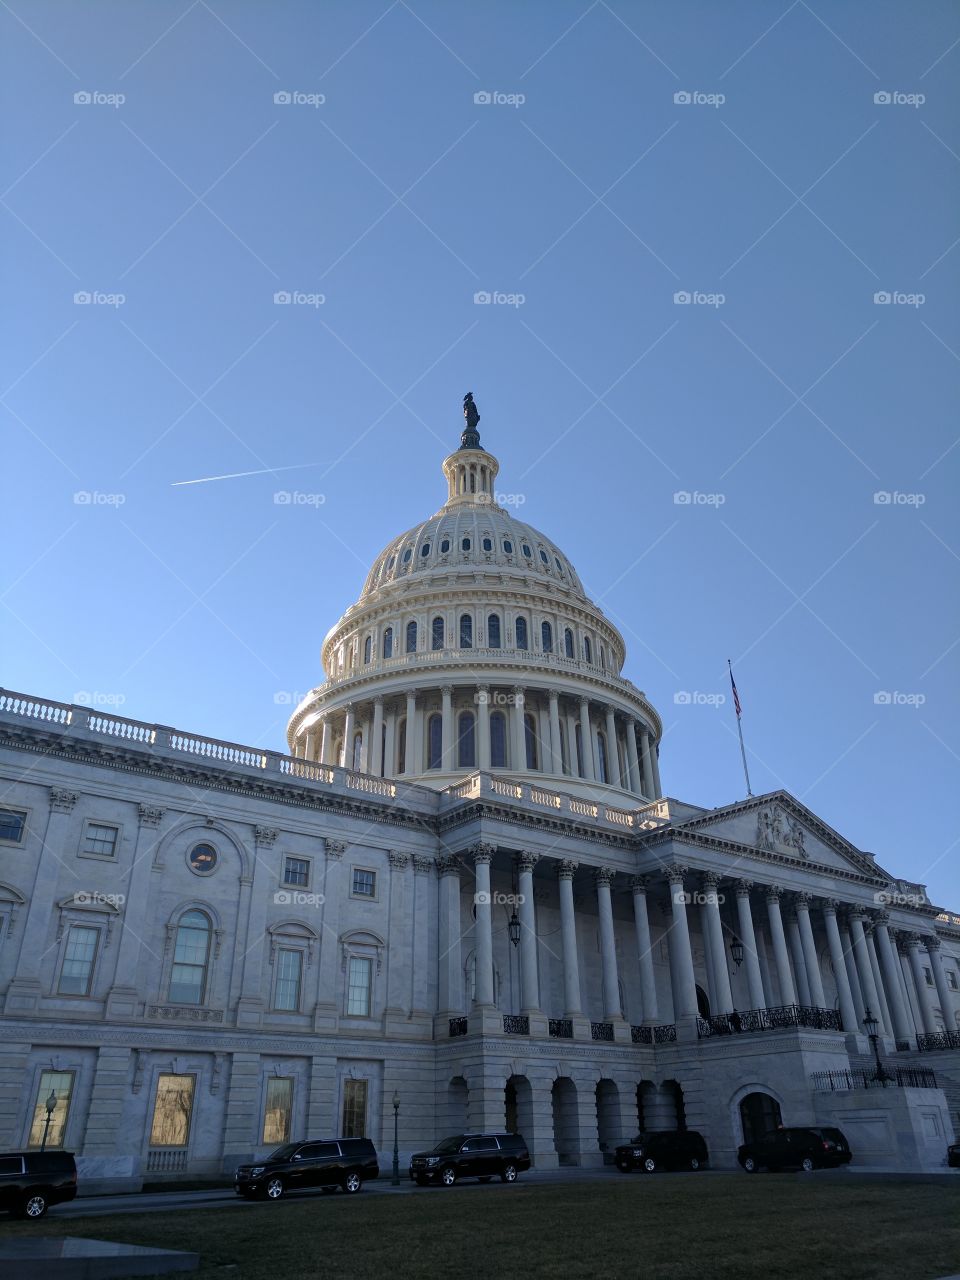 The east front of the United States Capitol is seen in the afternoon. (Image source: Jon Street Media)